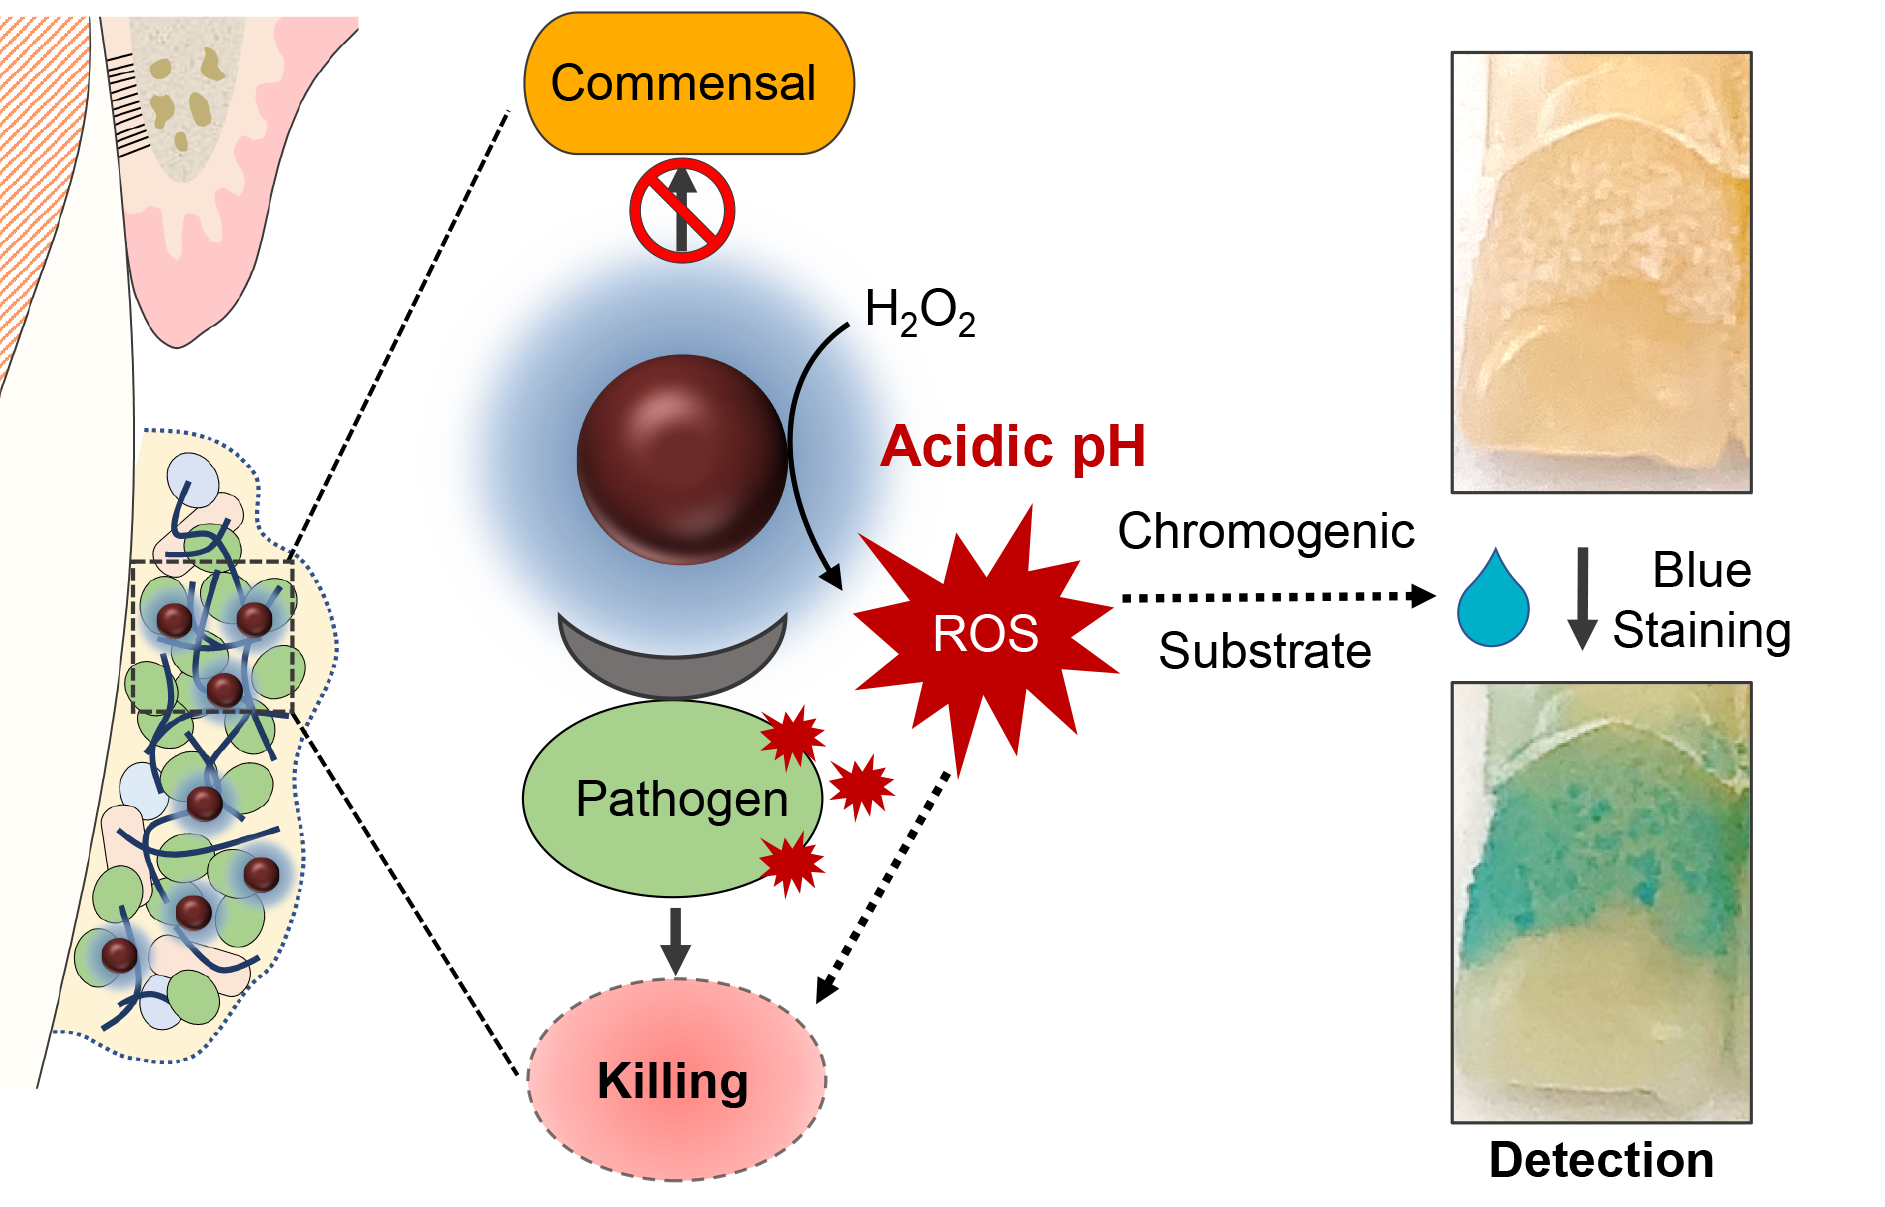 Pairing iron oxide nanoparticles with hydrogen peroxide